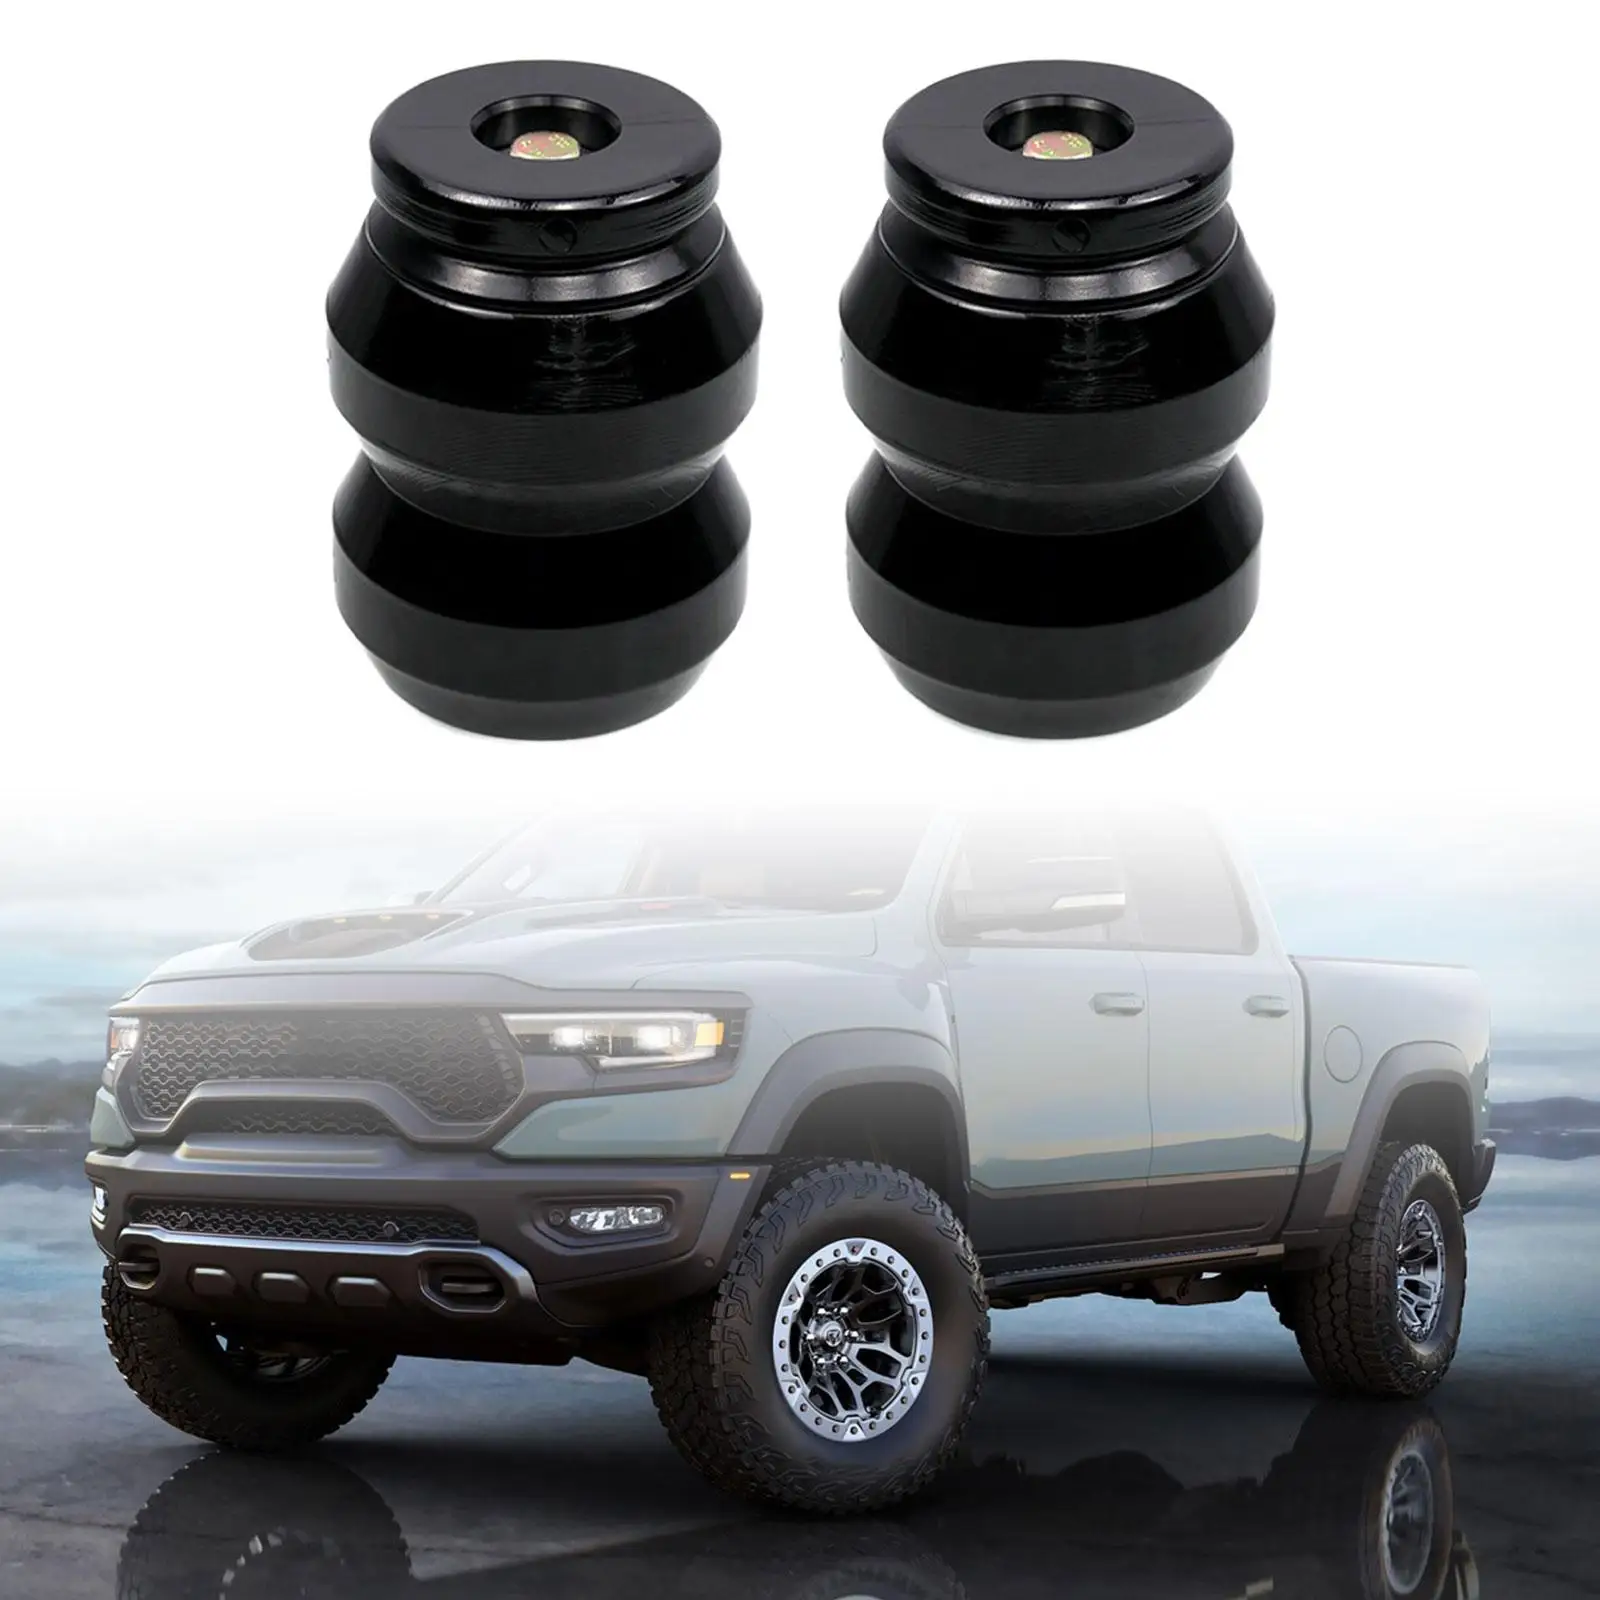 2x Suspension Enhancement System DR1500dq Replacement Parts High Quality for Dodge RAM 1500 2WD 4WD 2009-2021 Accessories